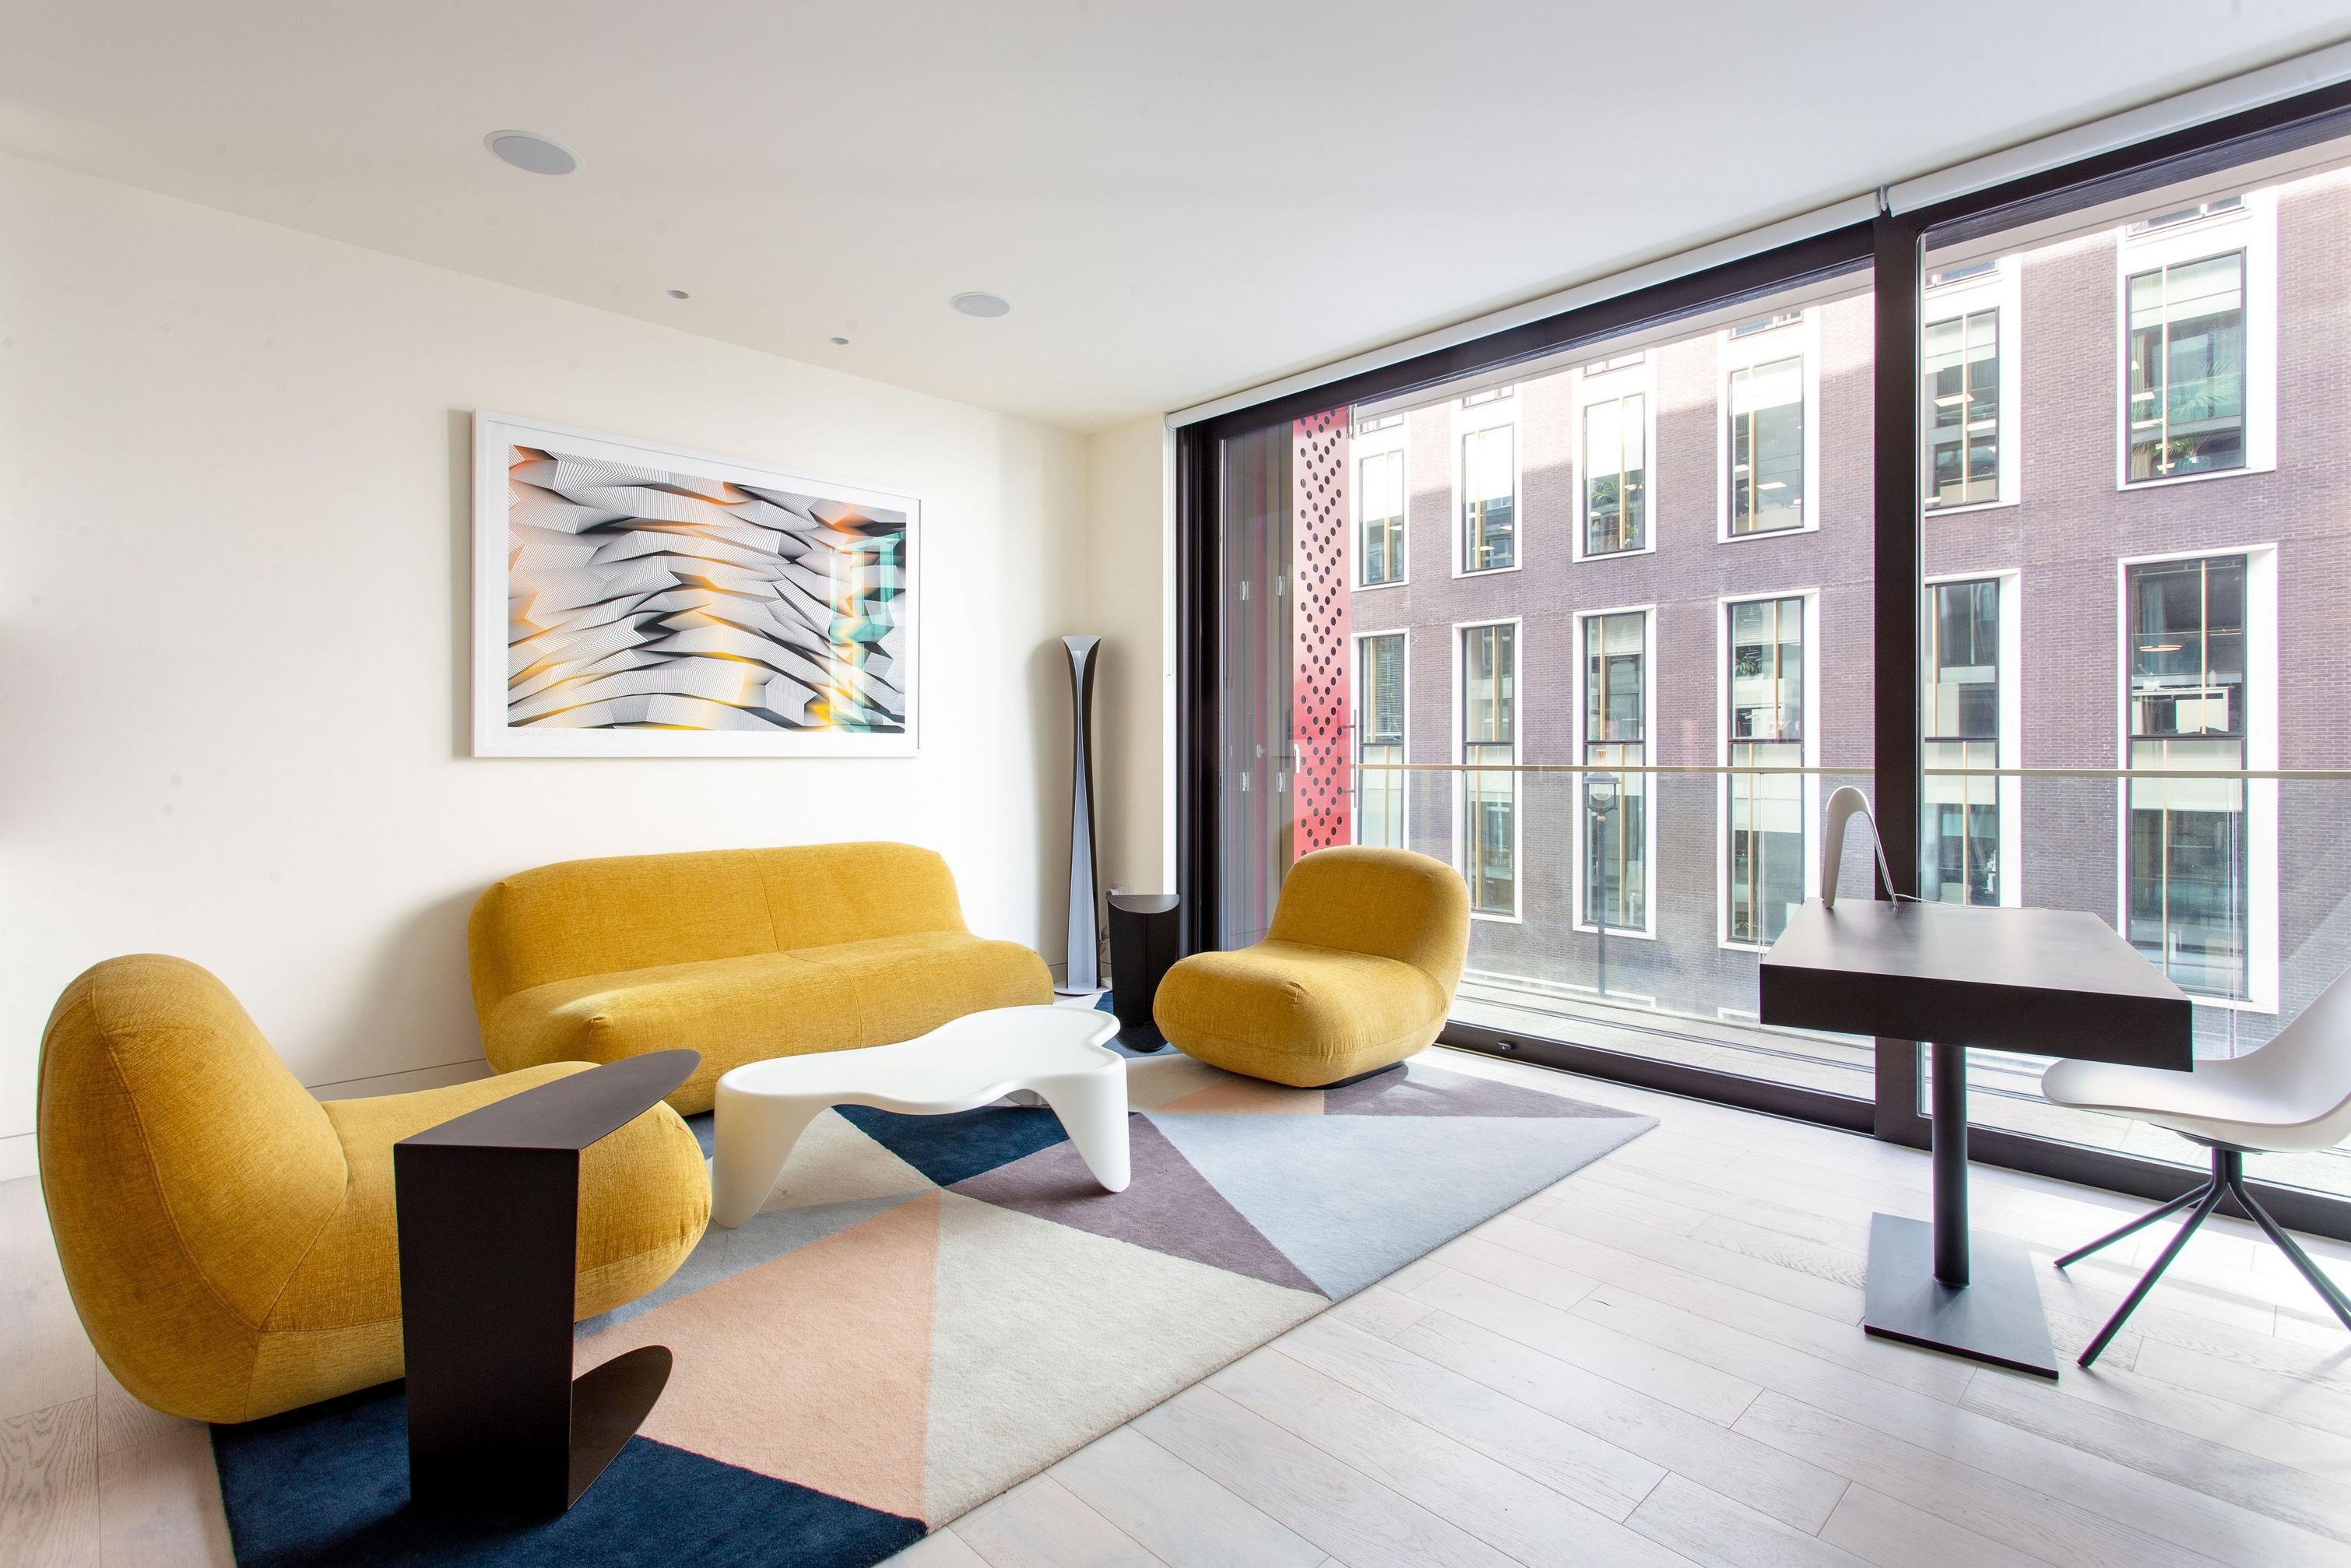 Bright living space with Golden Chelsea chairs, wall art, and city view window.